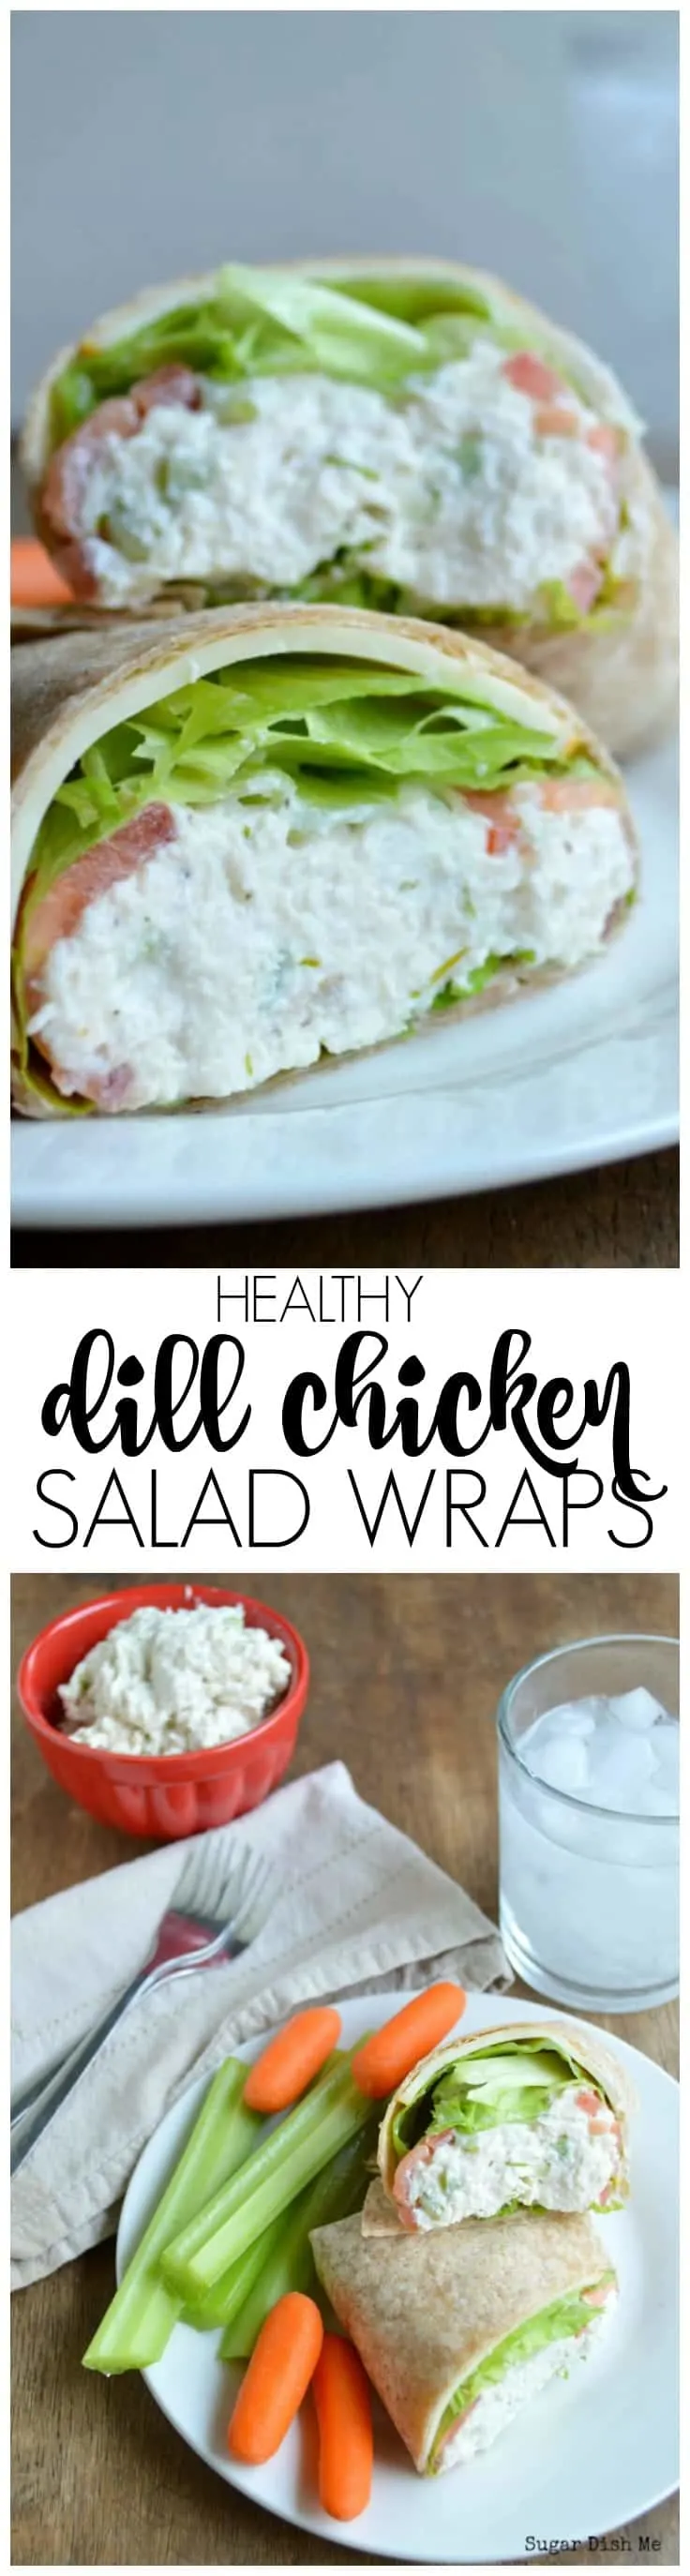 Healthy Dill Chicken Salad Wraps are made with Greek yogurt for extra protein and lots of flavor!